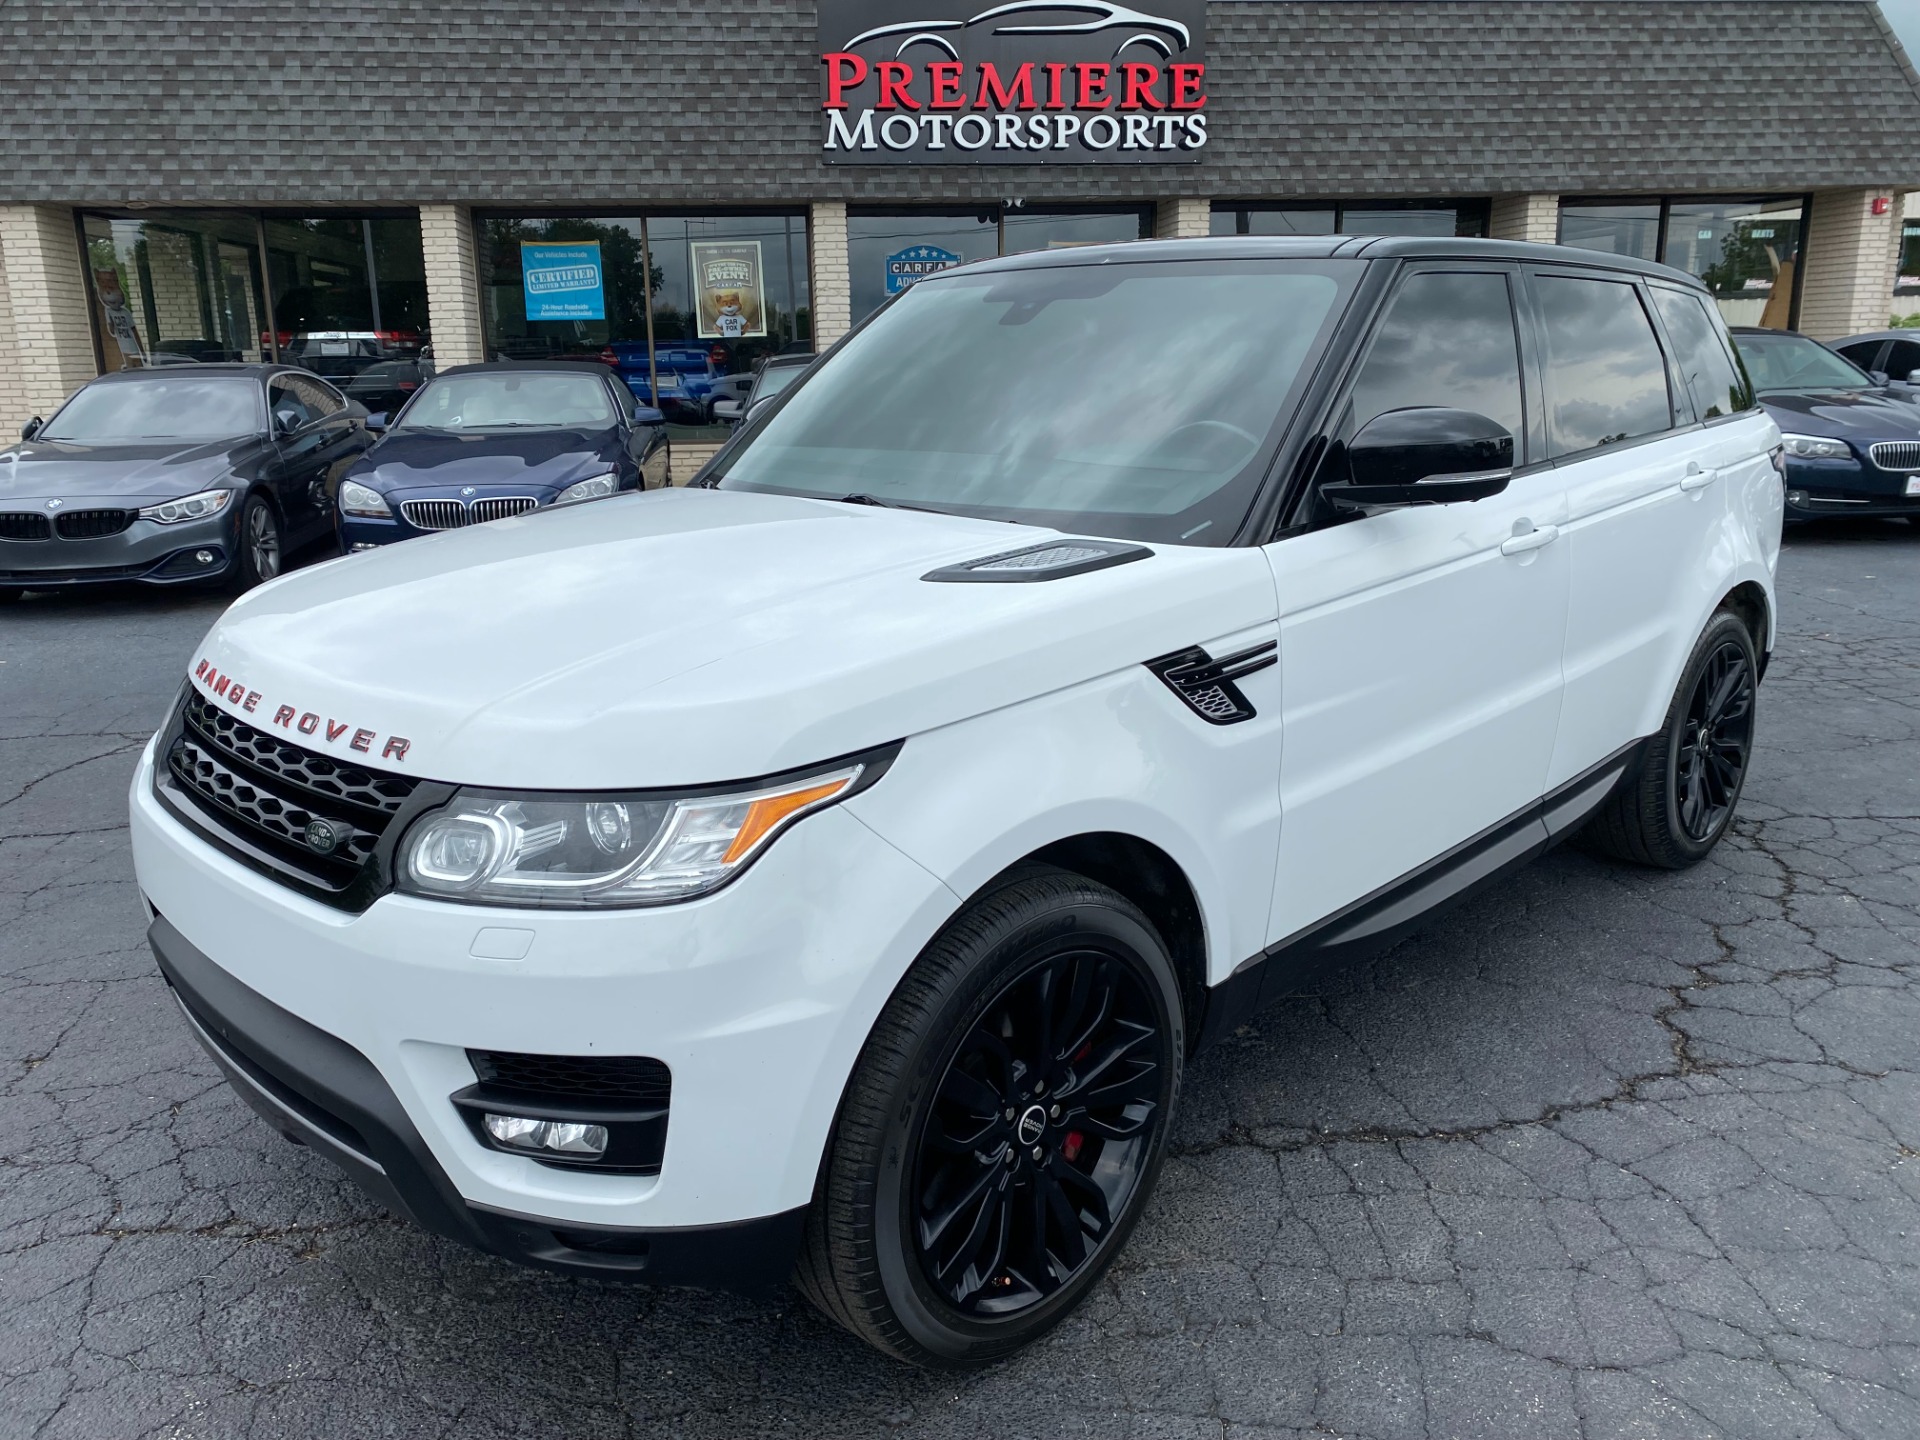 bescherming Erfenis menigte Used 2016 Land Rover Range Rover Sport Supercharged Dynamic For Sale (Sold)  | Premiere Motorsports Stock #PM4756A